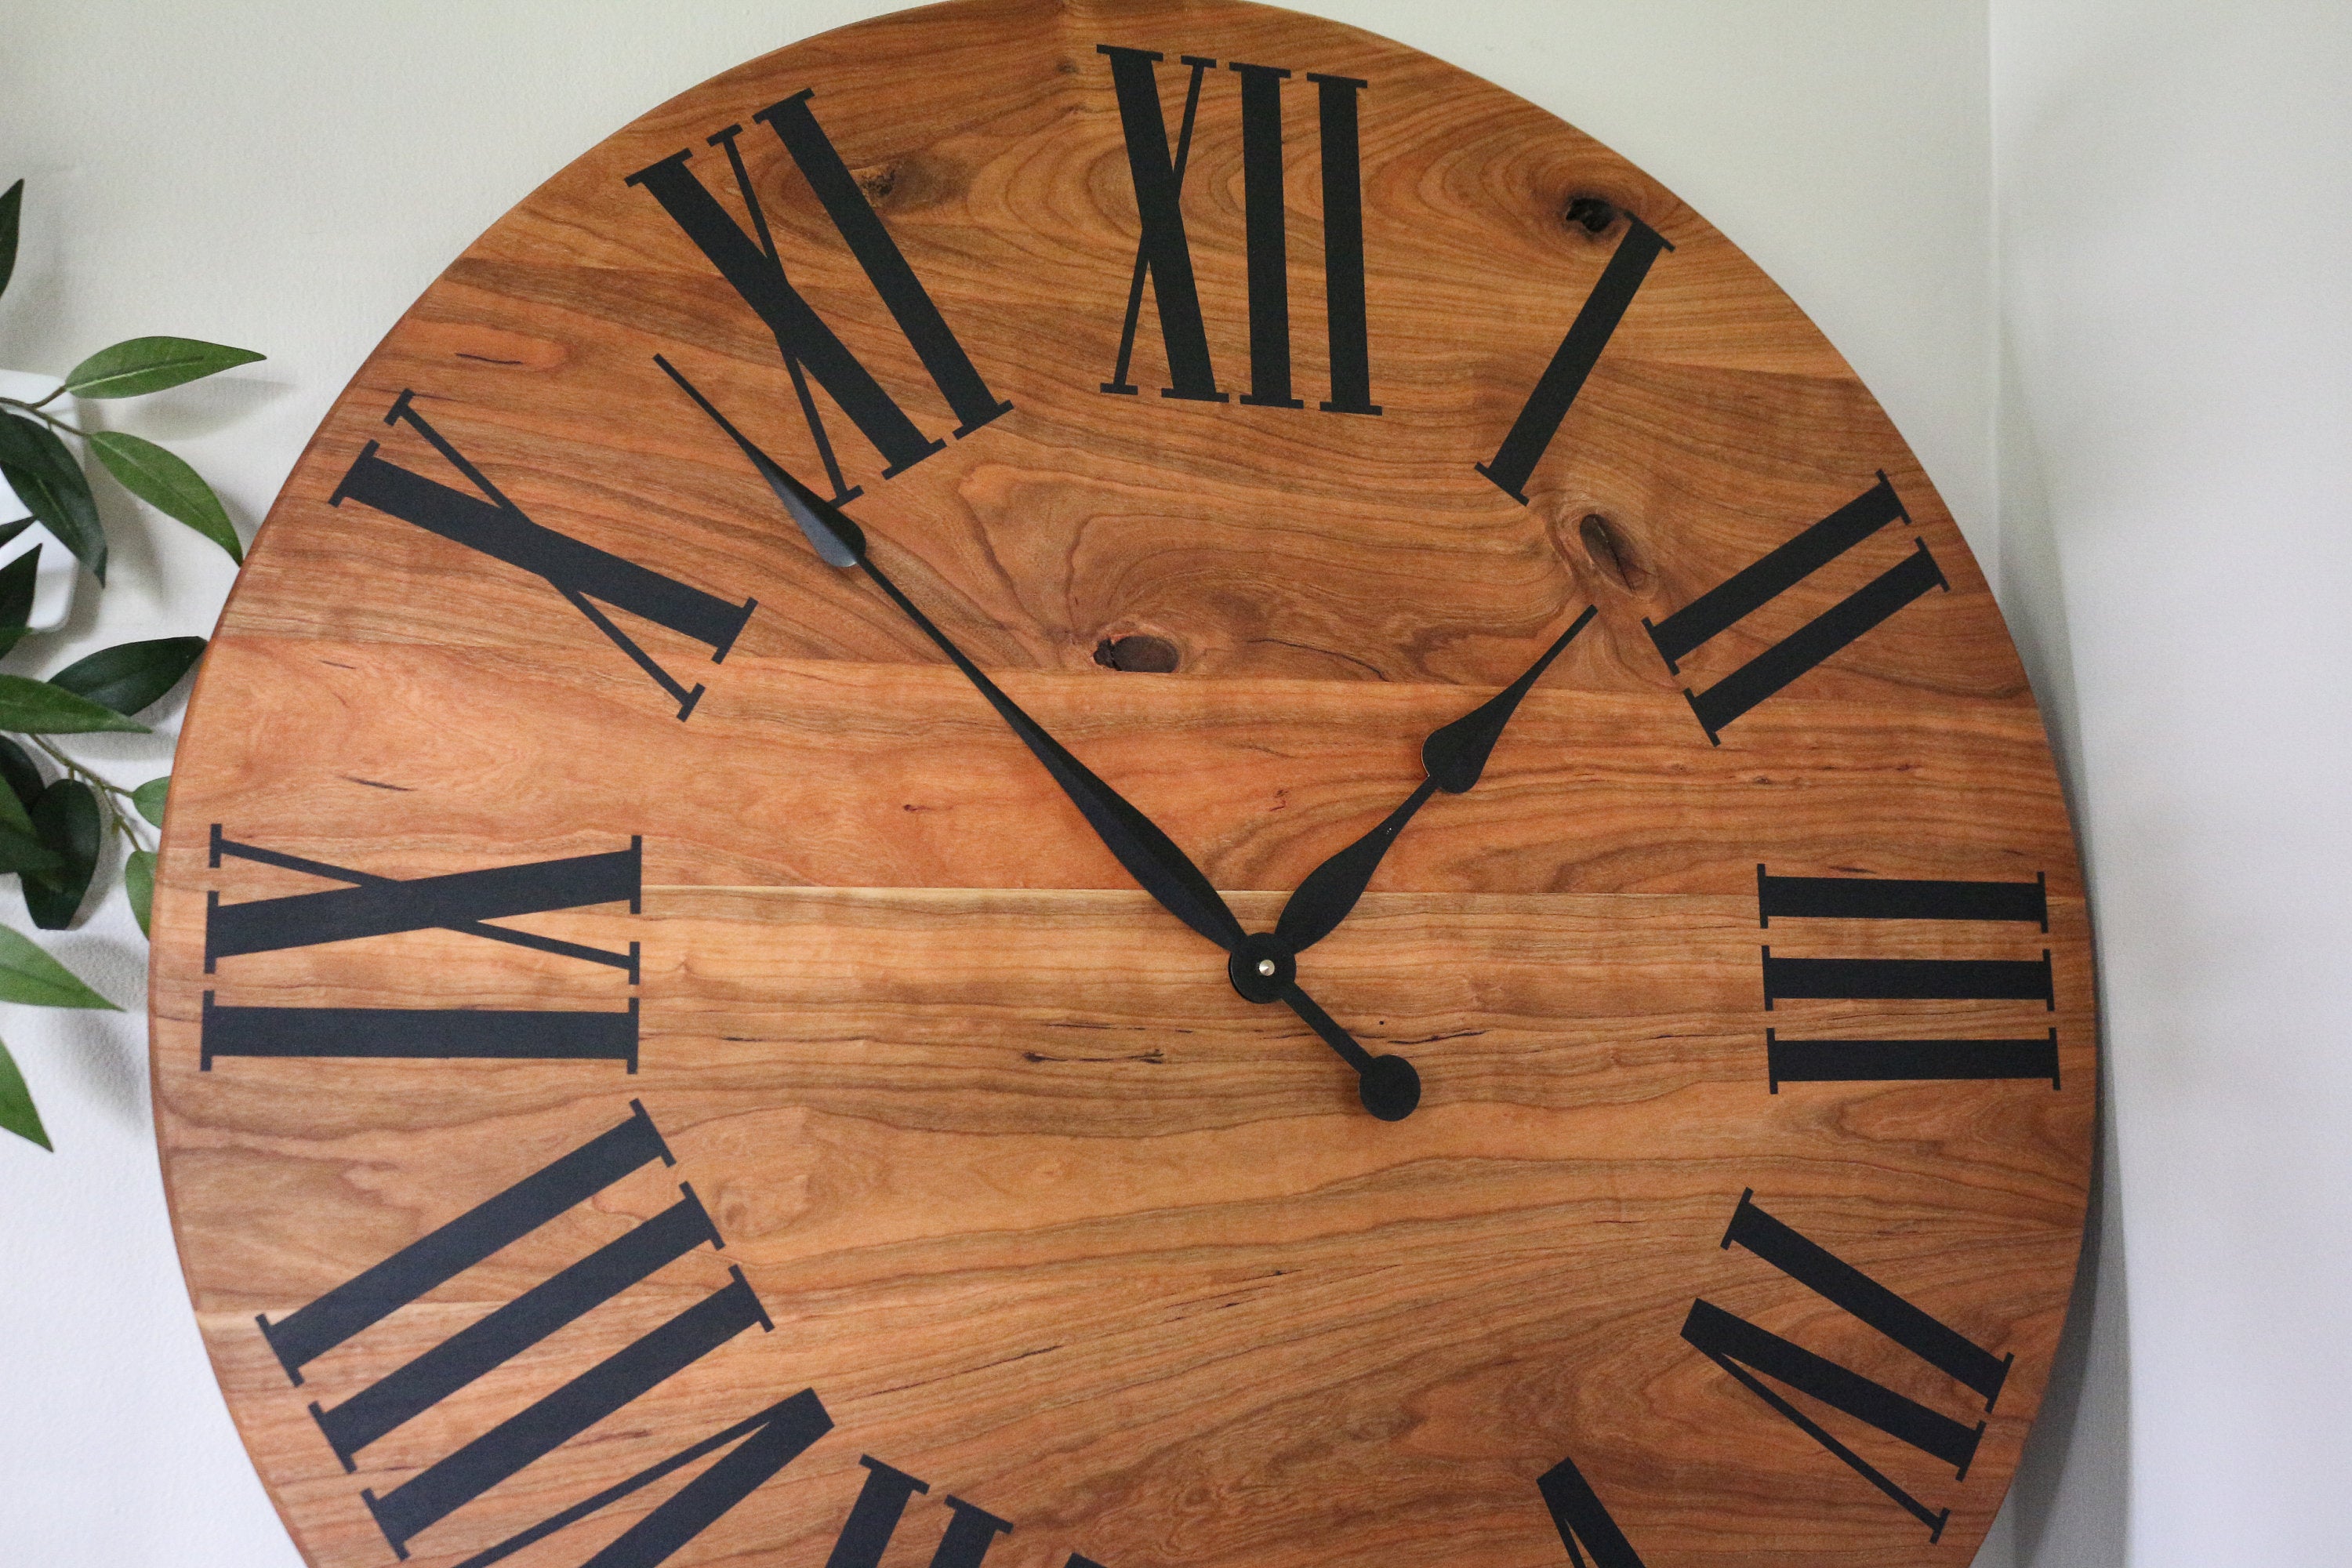 Large Solid Cherry Hardwood Wall Clock with Black Roman Numerals